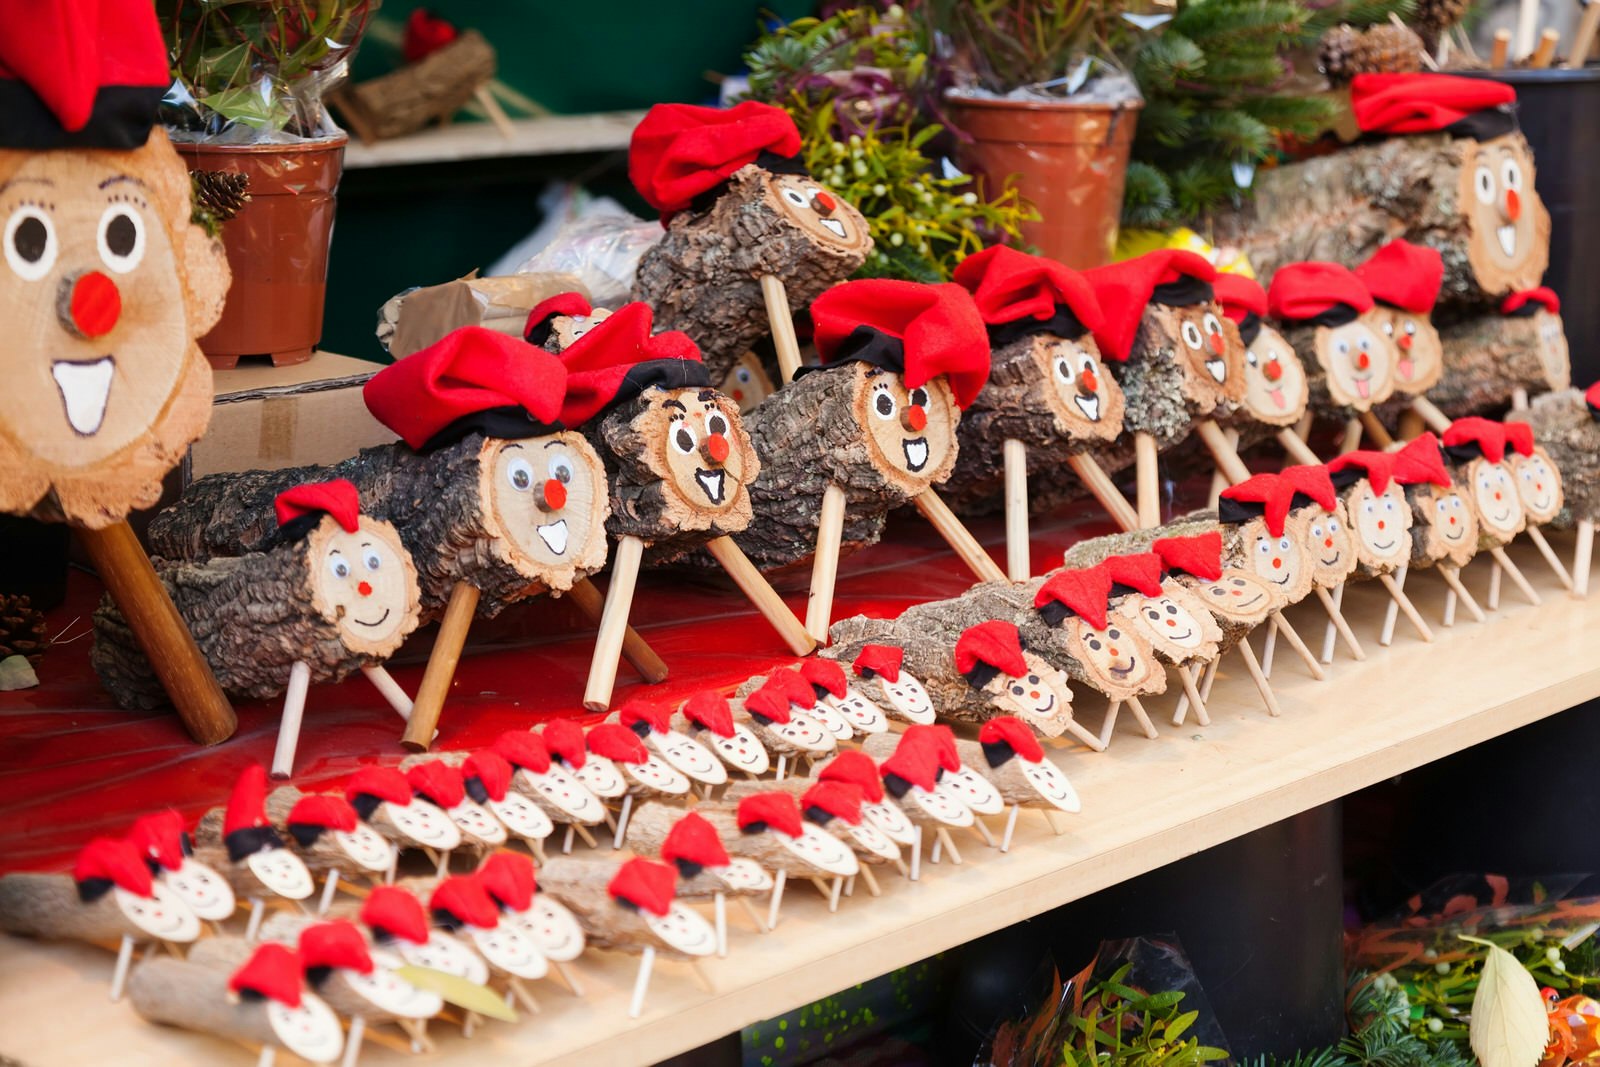 A display of wooden Tió de Nadal (Christmas logs), which is a character in Catalan mythology relating to a Christmas tradition.